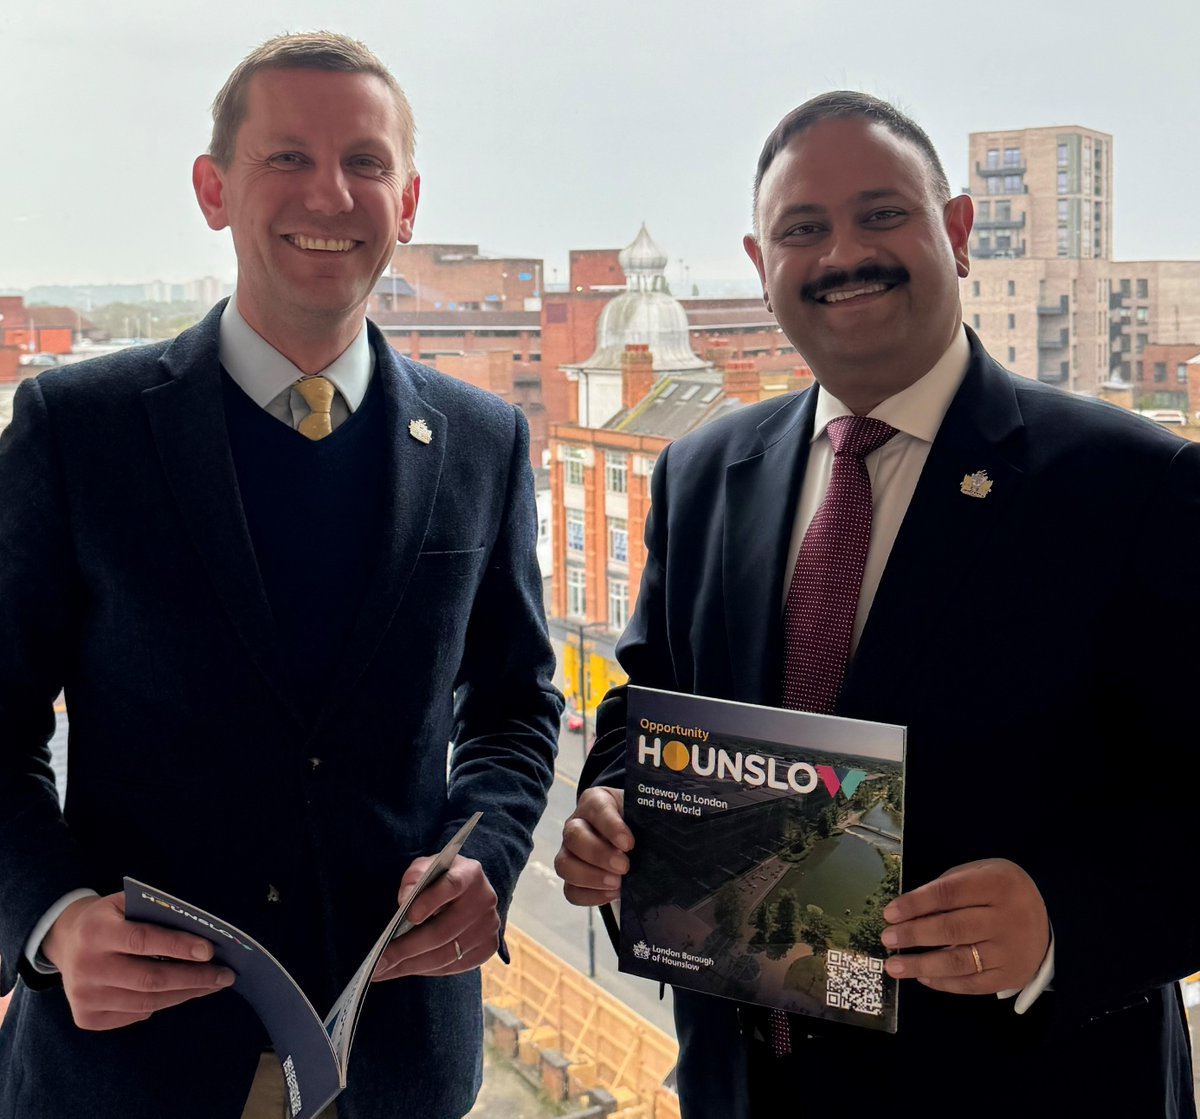 📢Spotlight on #OpportunityHounslow! In Let’s Talk Business magazine's latest issue, @shansview & @cllrtombruce highlight the Council's transformative regeneration vision & exciting investment opportunities to enable economic growth for #Hounslow 👉issuu.com/benham/docs/le…